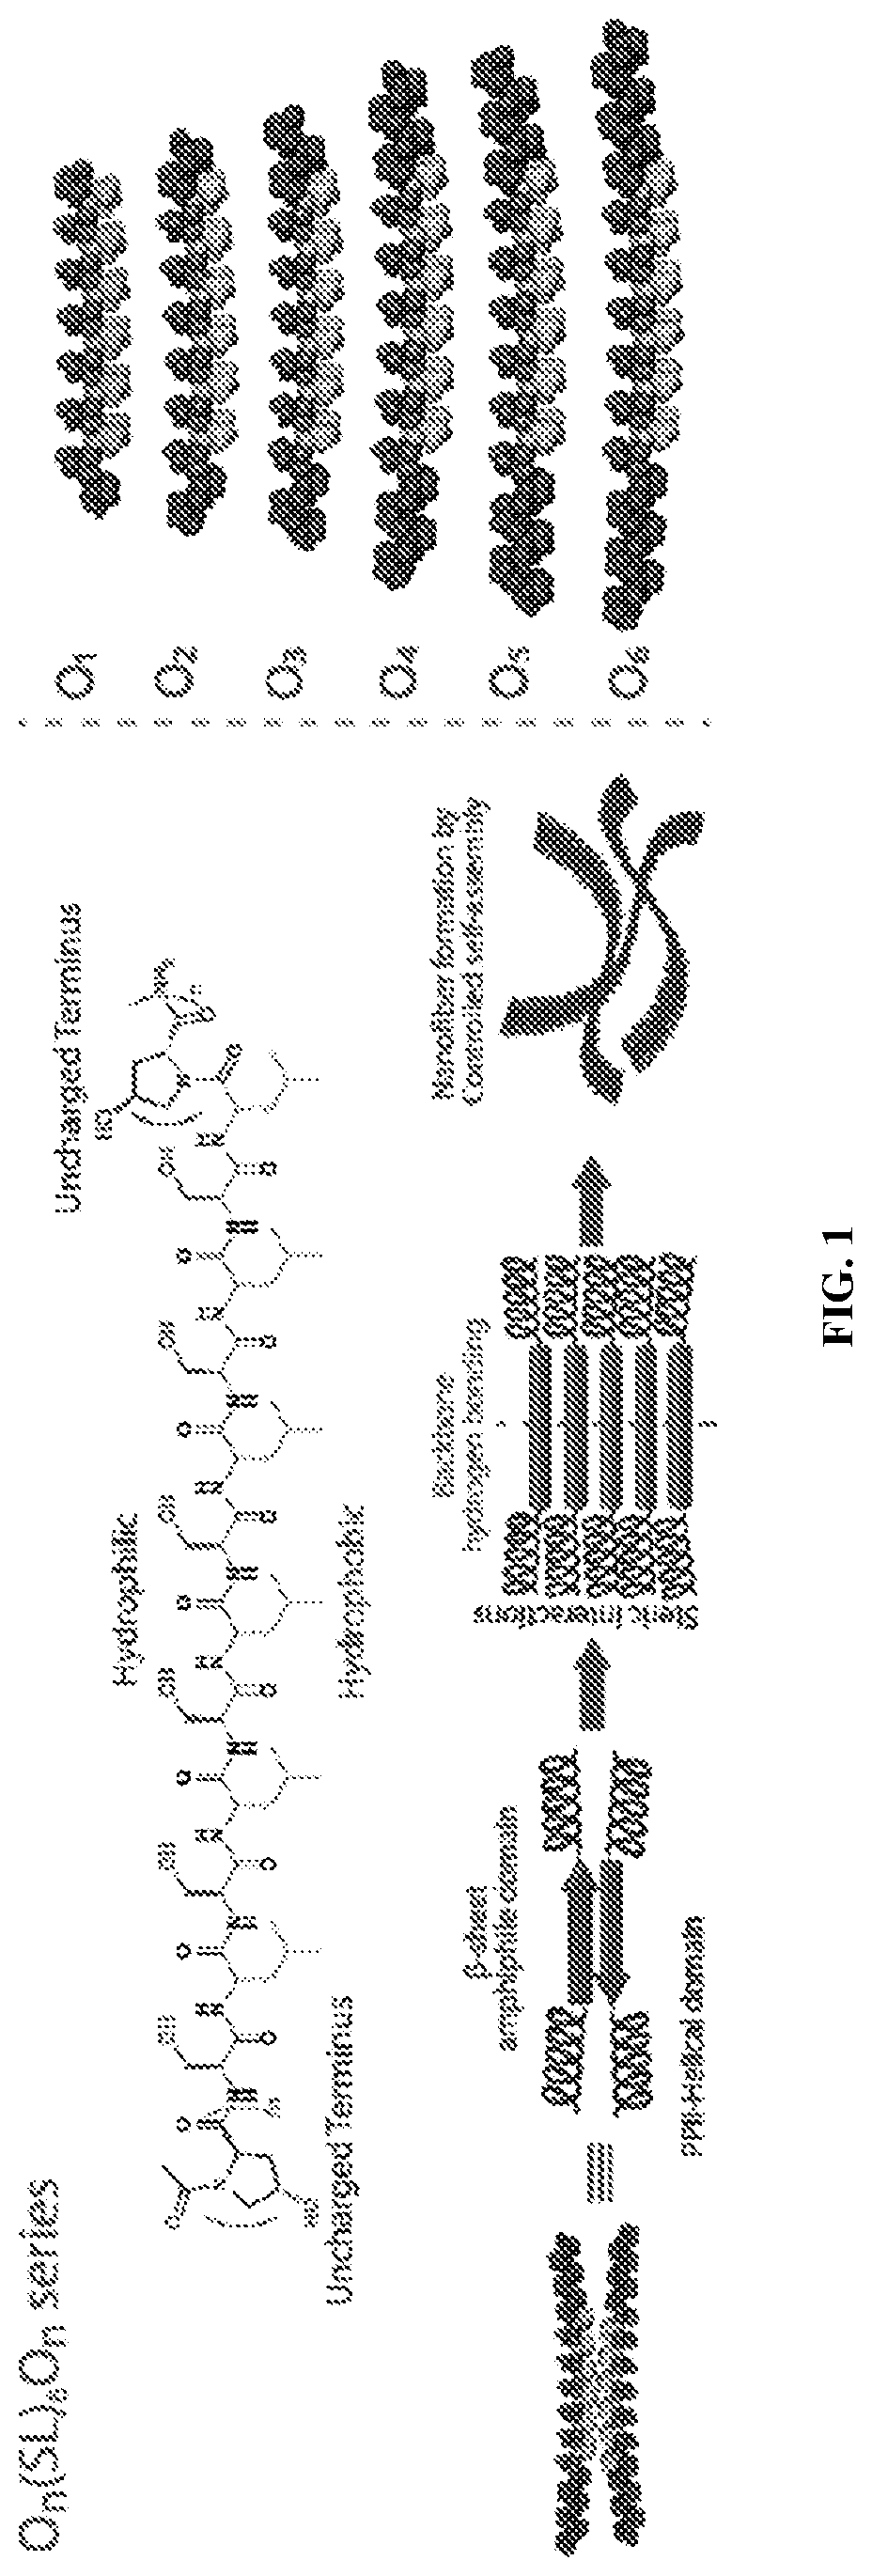 Neutral multidomain peptide hydrogels and uses thereof